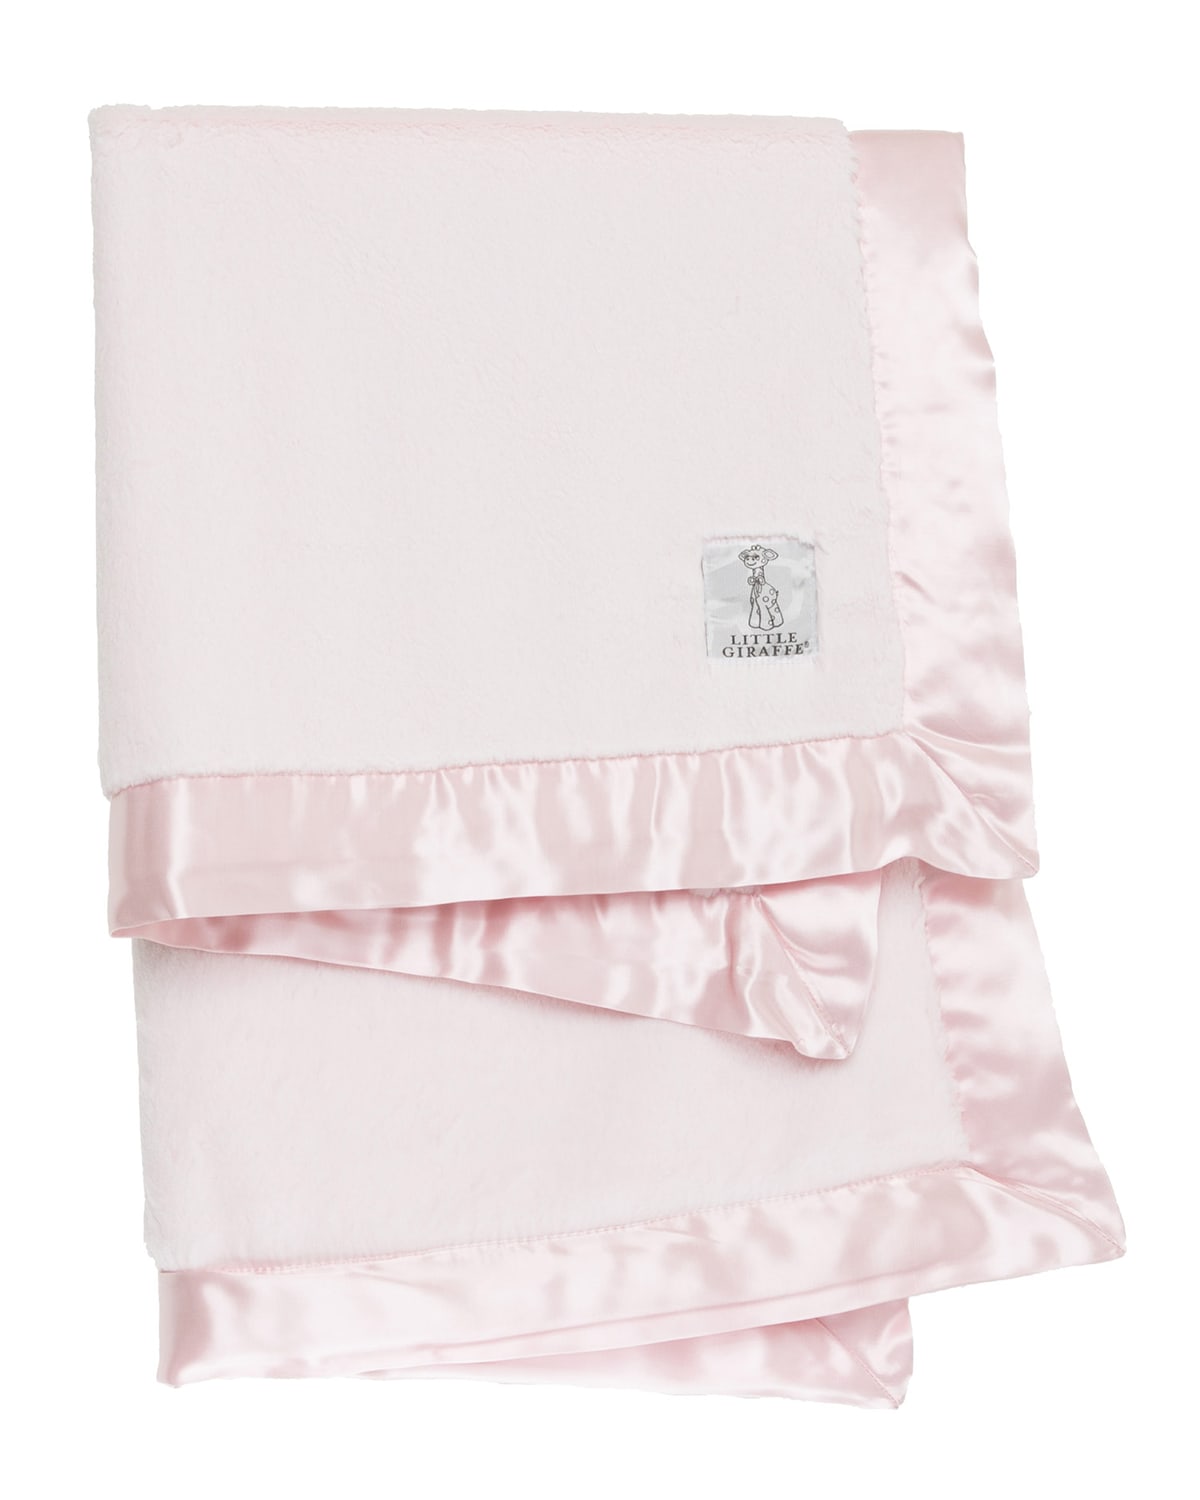 gifts for baptism - Blanket with Satin Border